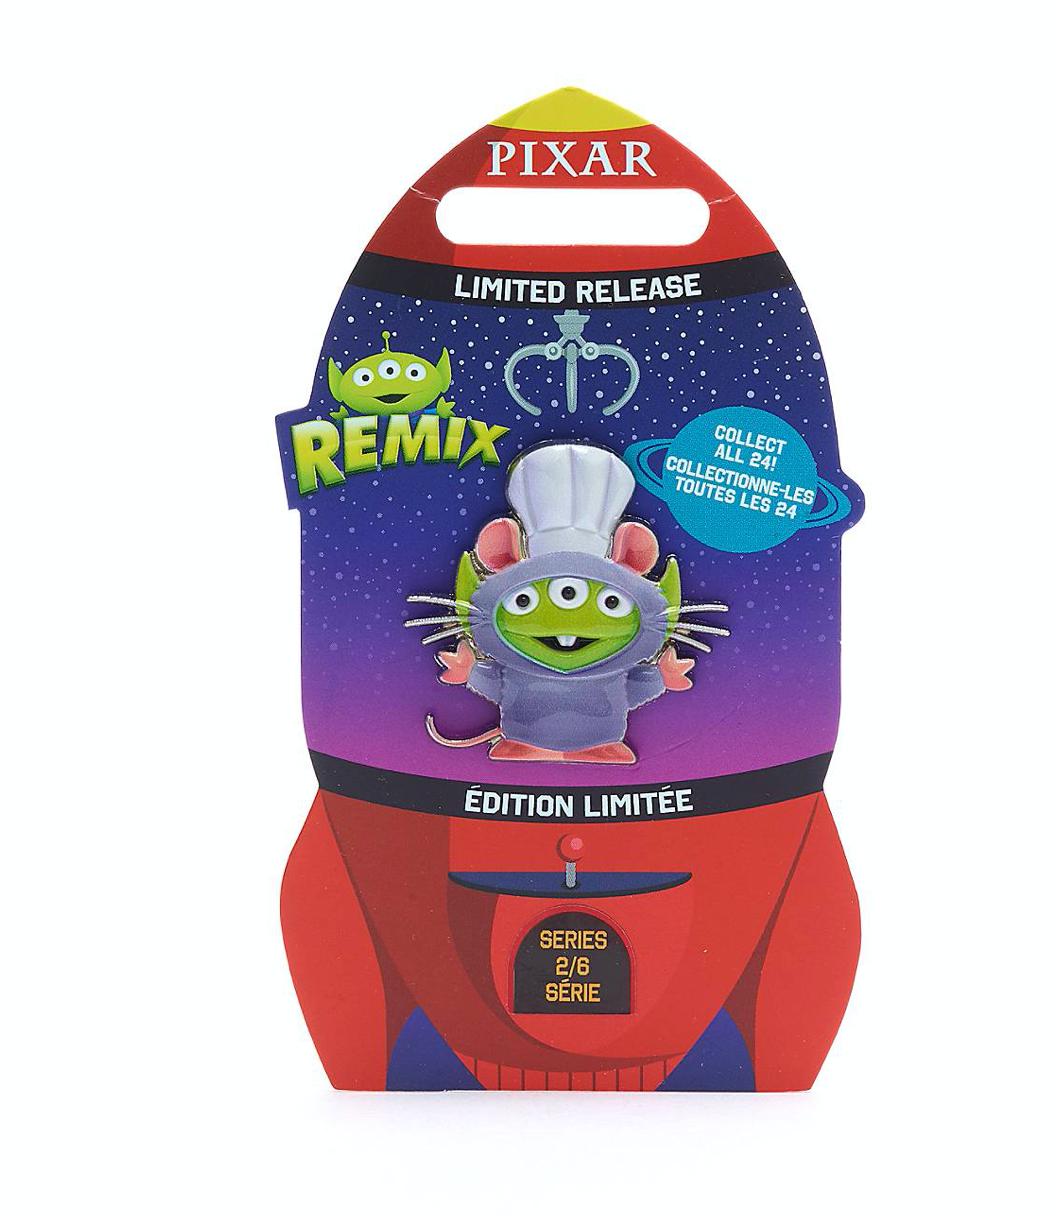 Disney Toy Story Alien Pixar Remix Pin Remy Limited Release New